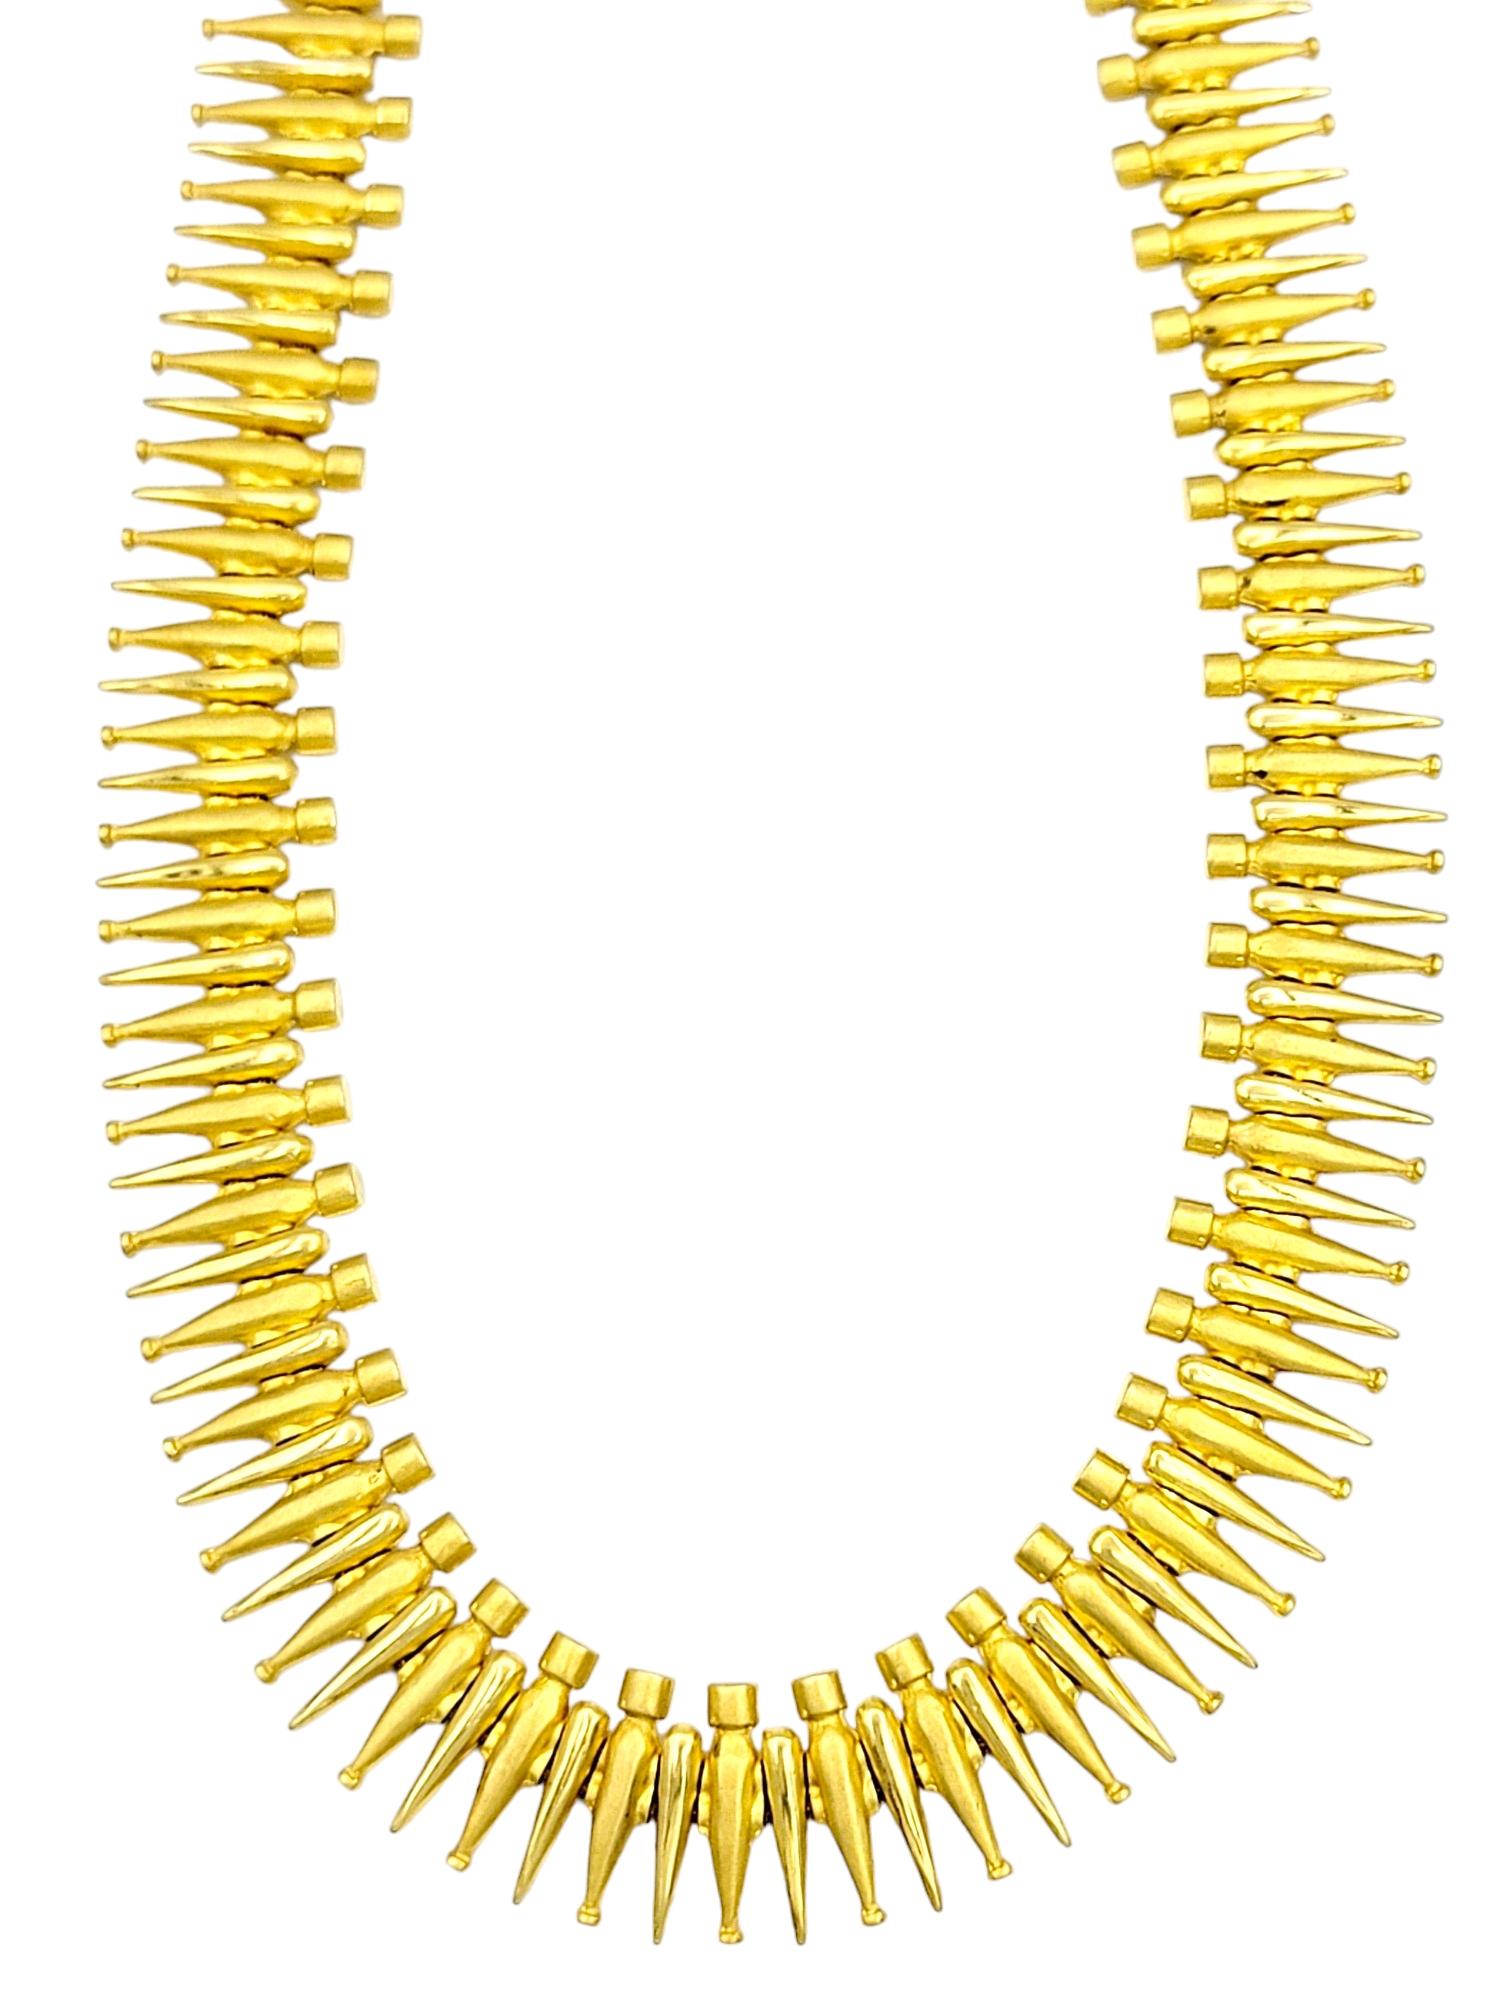 This exquisite 18 karat yellow gold choker necklace exudes timeless sophistication. The narrow link design seamlessly blends brushed and polished gold links, creating a striking contrast that catches and reflects light with every movement. The